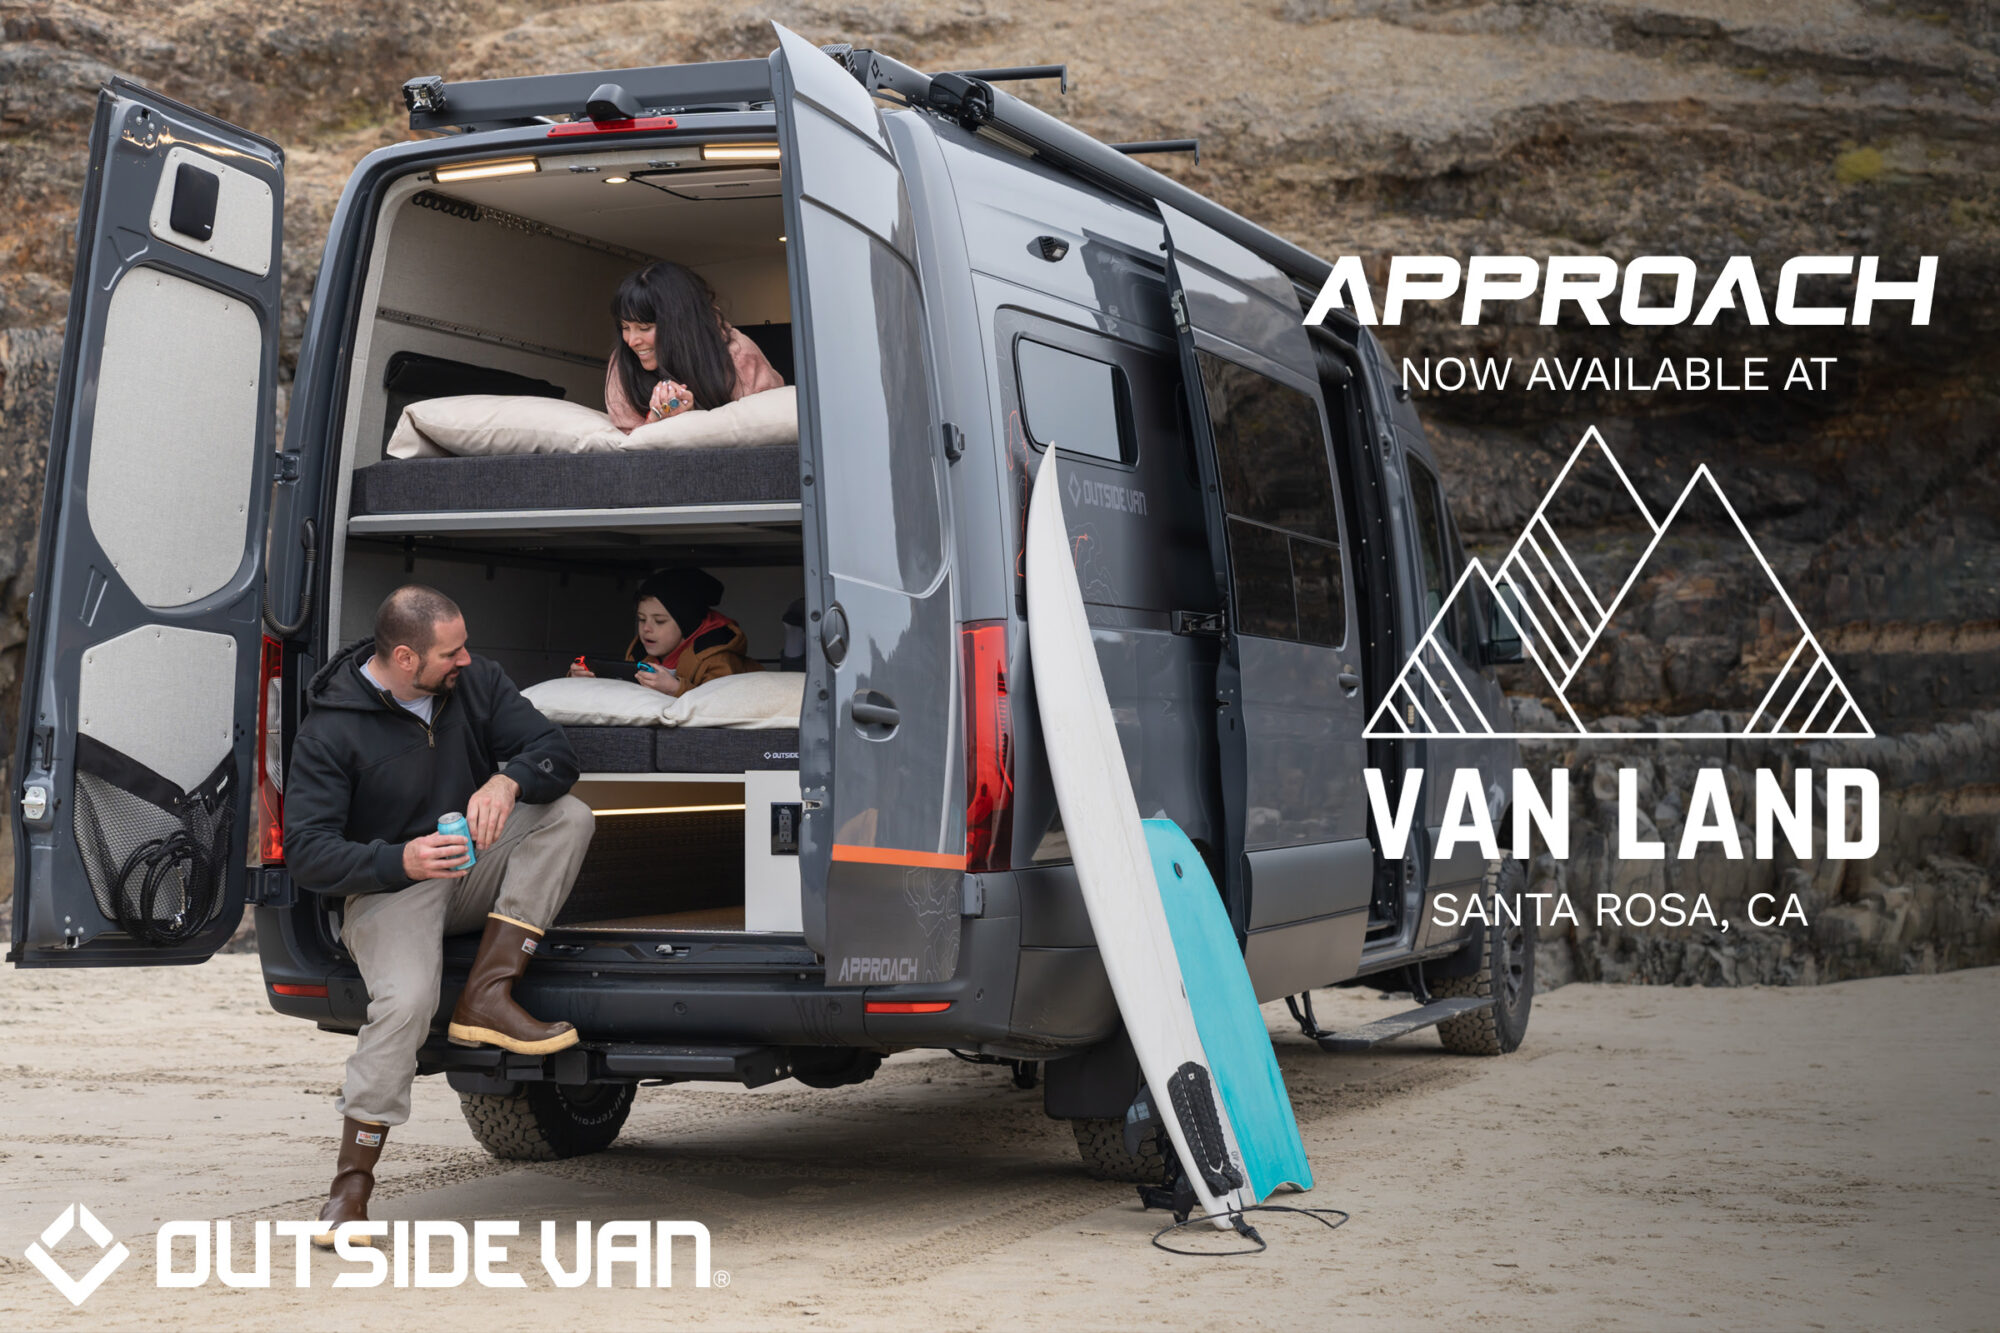 A couple and their child sitting in the Outside Van Approach model with the rear doors opened. Text overlay reads Approach Now Available at Van Land Santa Rosa, California